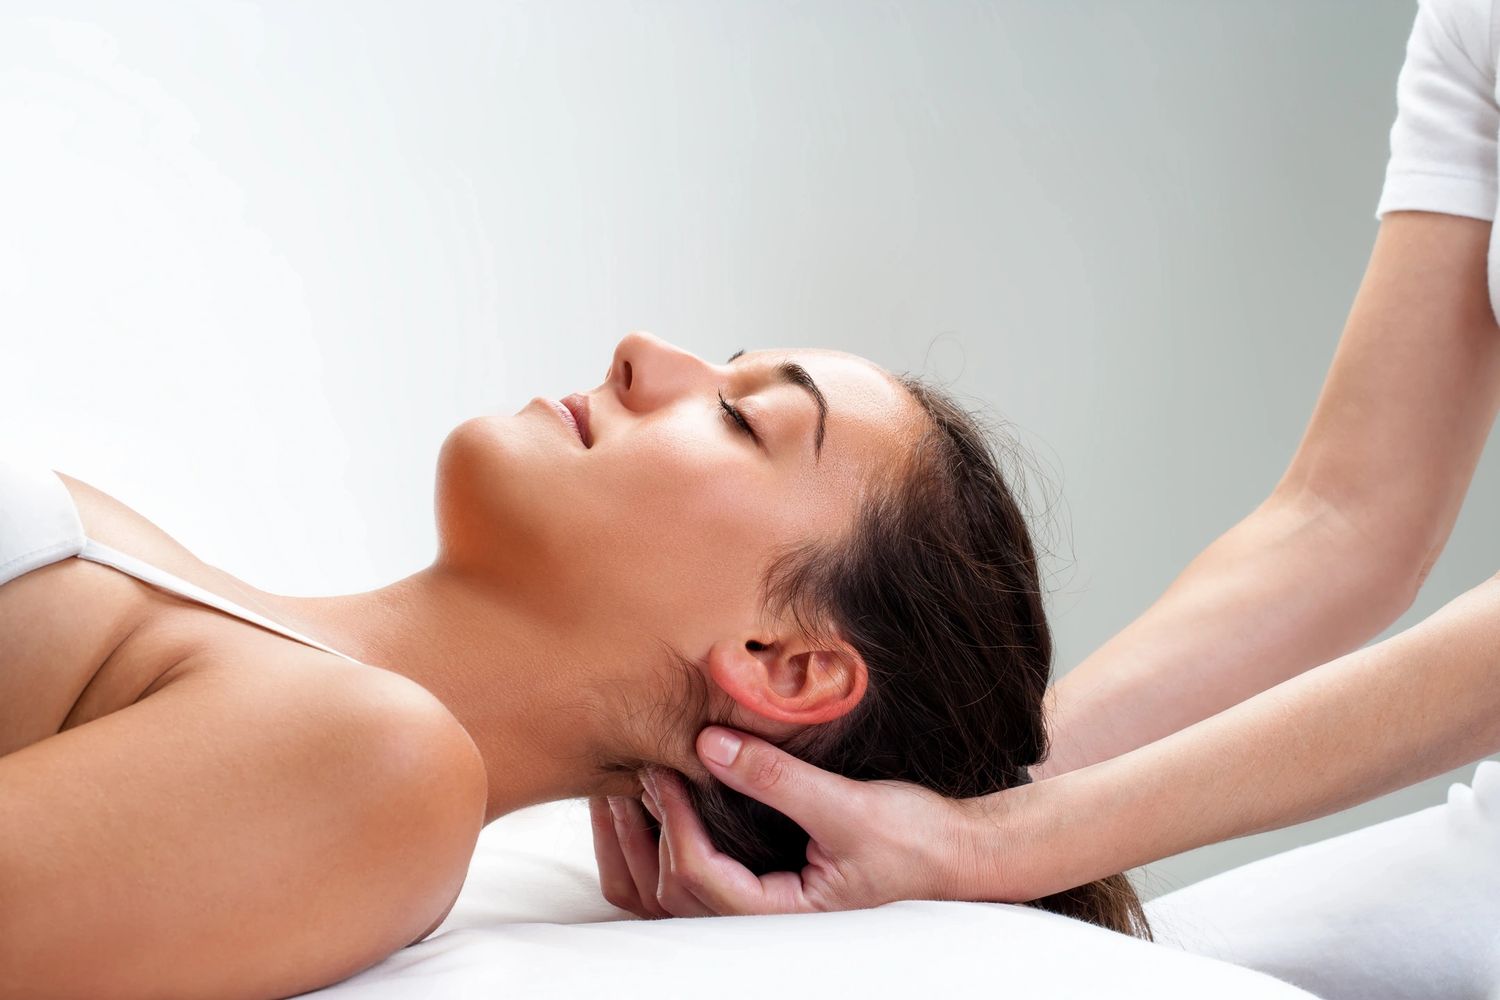 Professional Mobile London Massage therapy services for females. pain, stress, relaxation